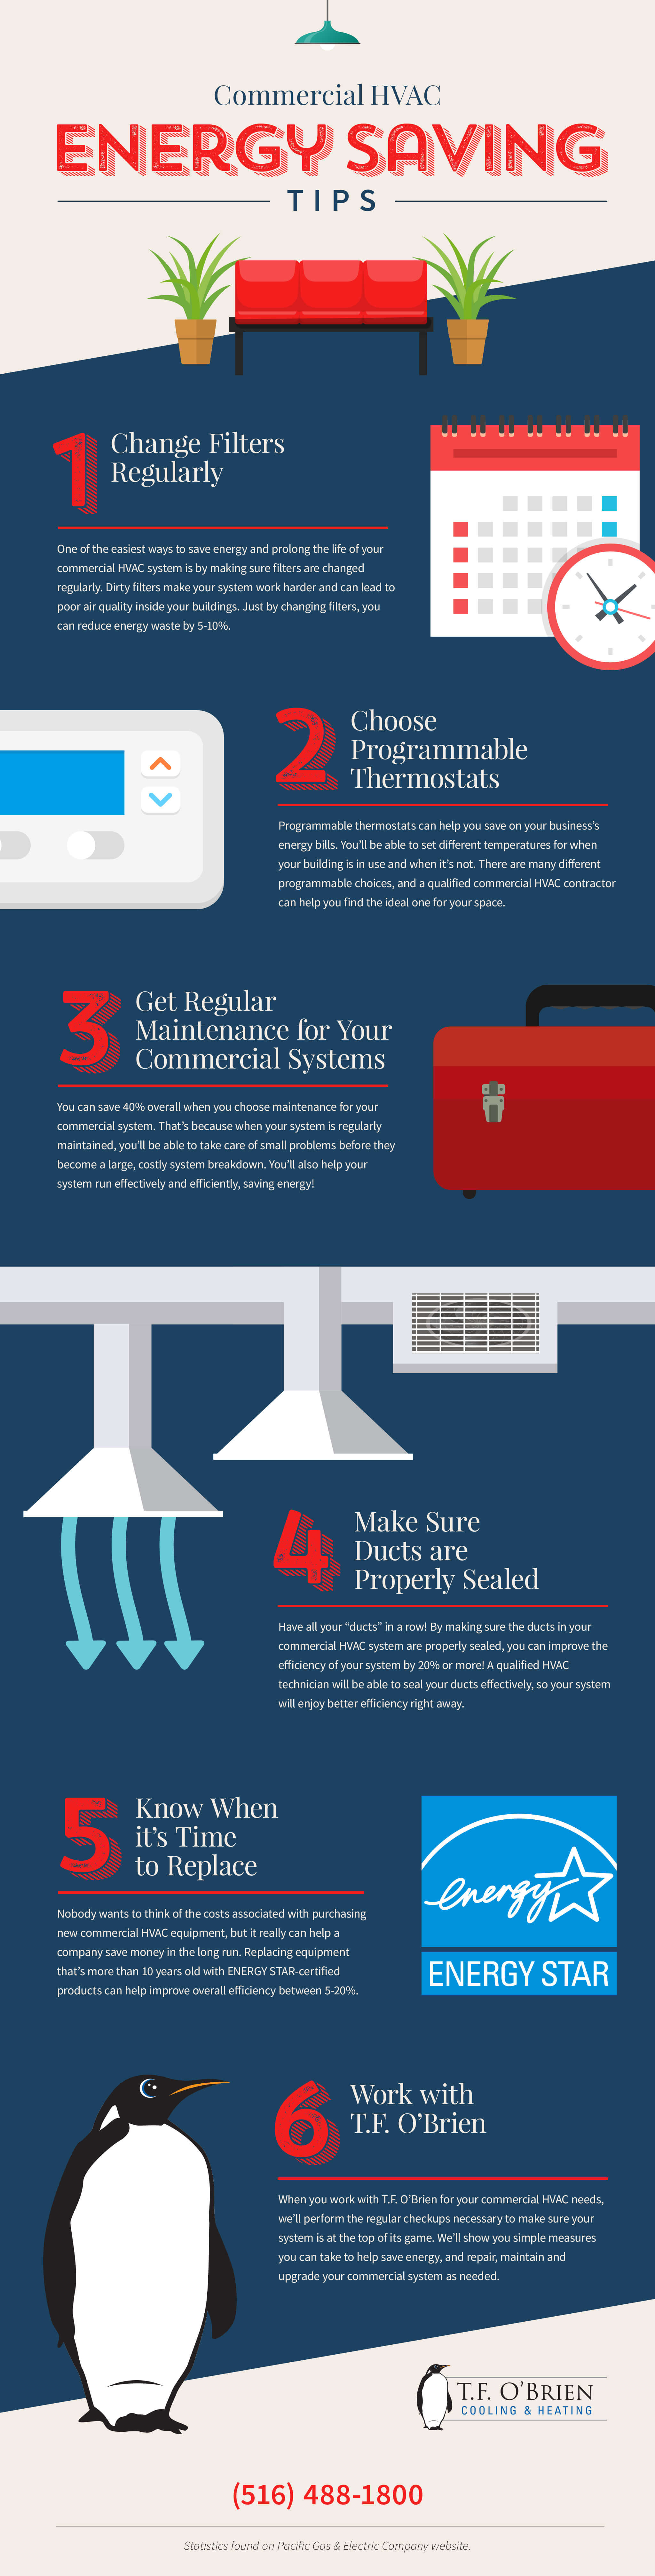 Energy saving tips in an infographic.